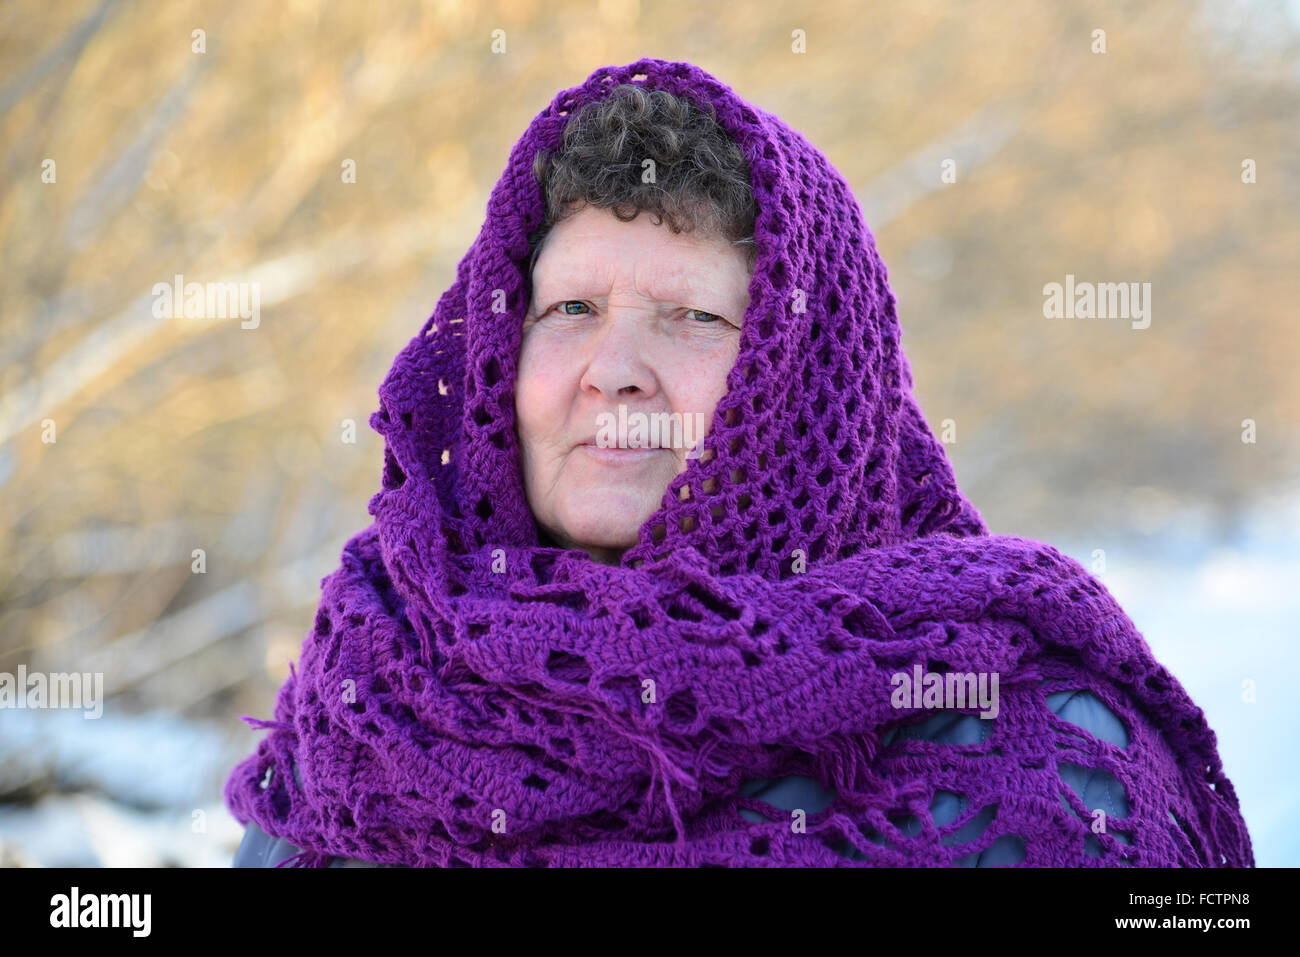 elderly woman in  purple  knitted shawl on her head Stock Photo